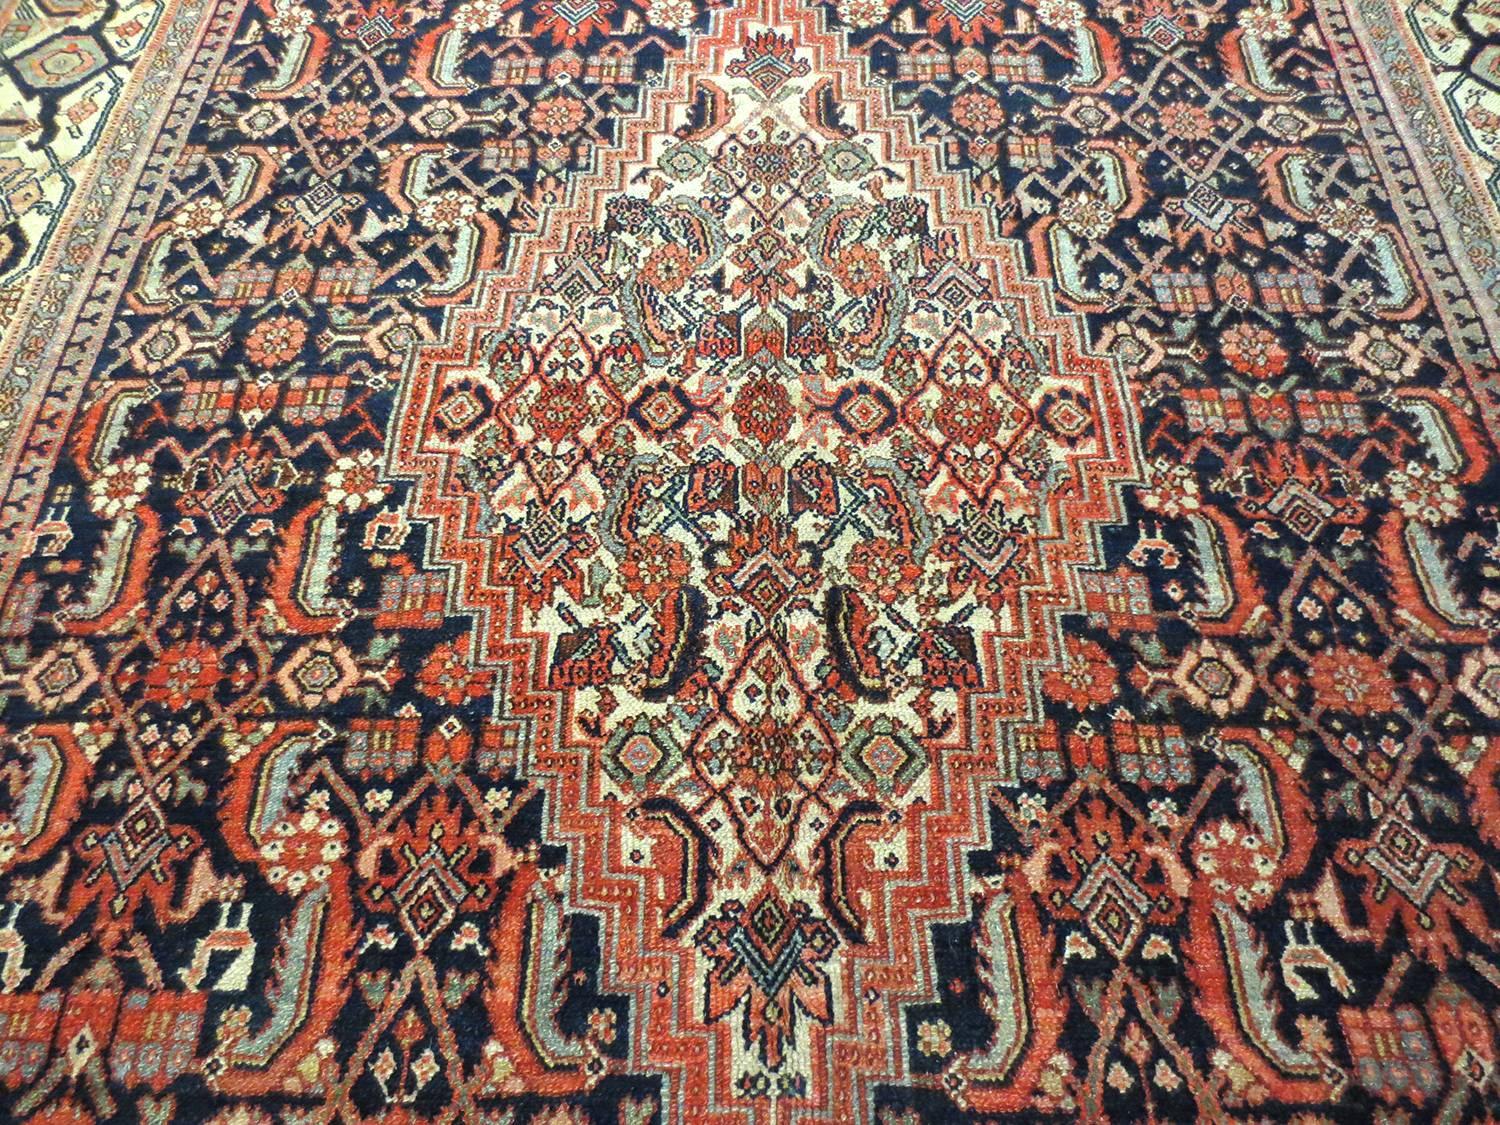 This is an antique Karabagh gallery size runner, circa 1890s. It is a beautifully woven, lavish rug with exceptional composition. An exquisite red diamond medallion sits at the centre of a deep navy blue field with four ivory corners in a color